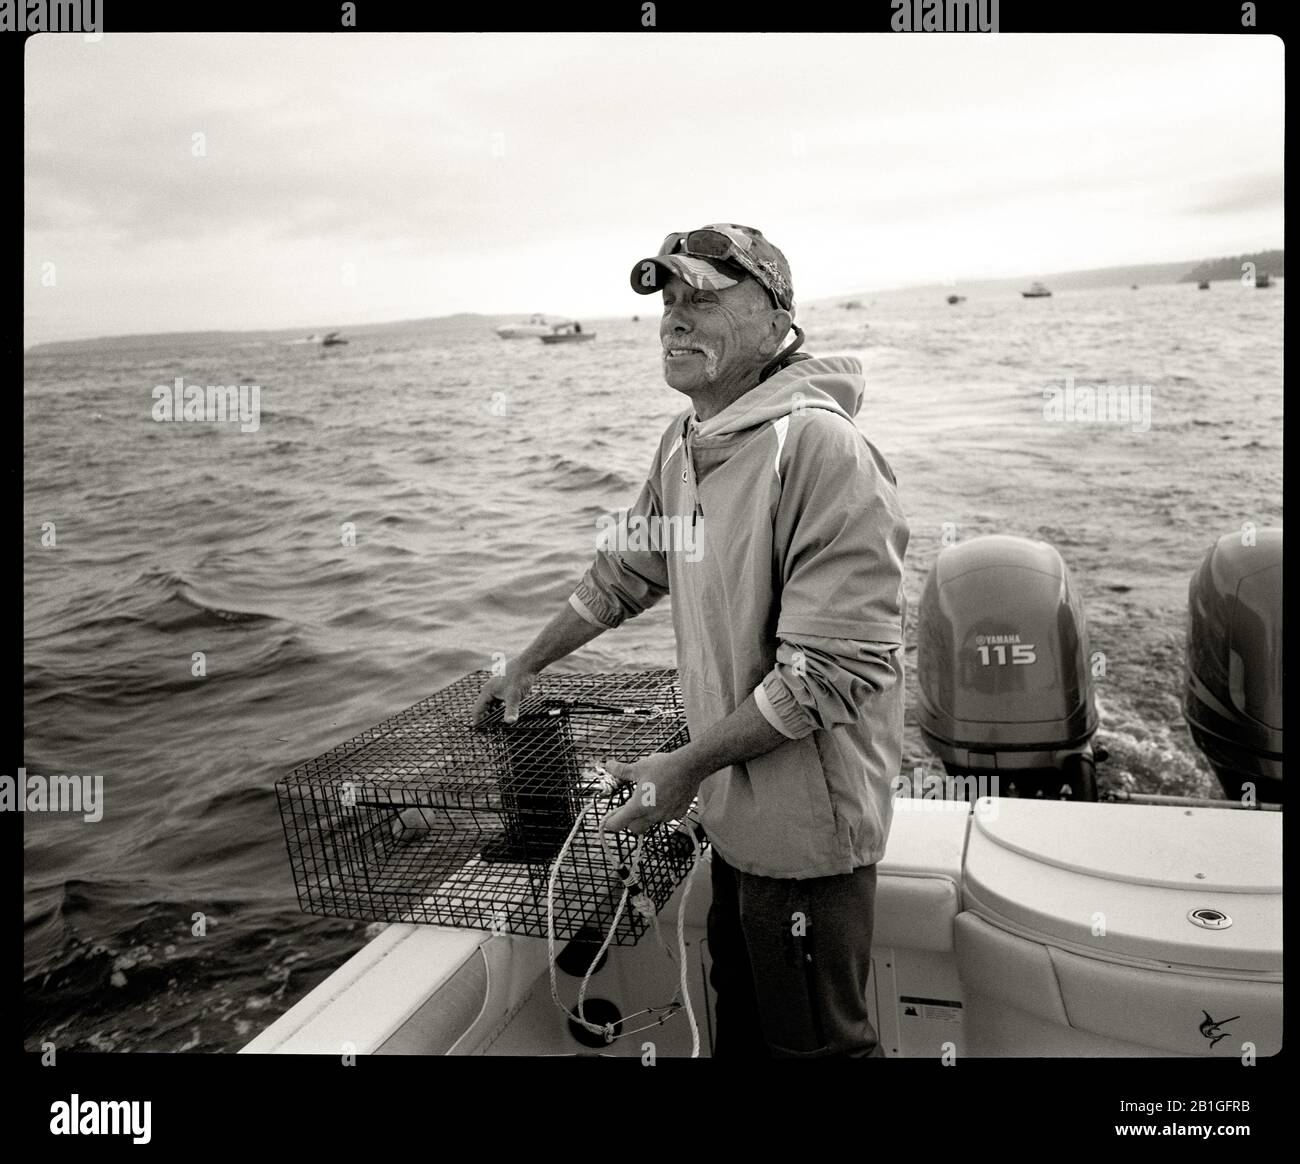 HB39105-00....WASHINGTON - Phil Russel shrimp fishing in the Puget Sound. Makina W67 Camera with Kodak 120 TXP Film processed in D76 1-1. Stock Photo